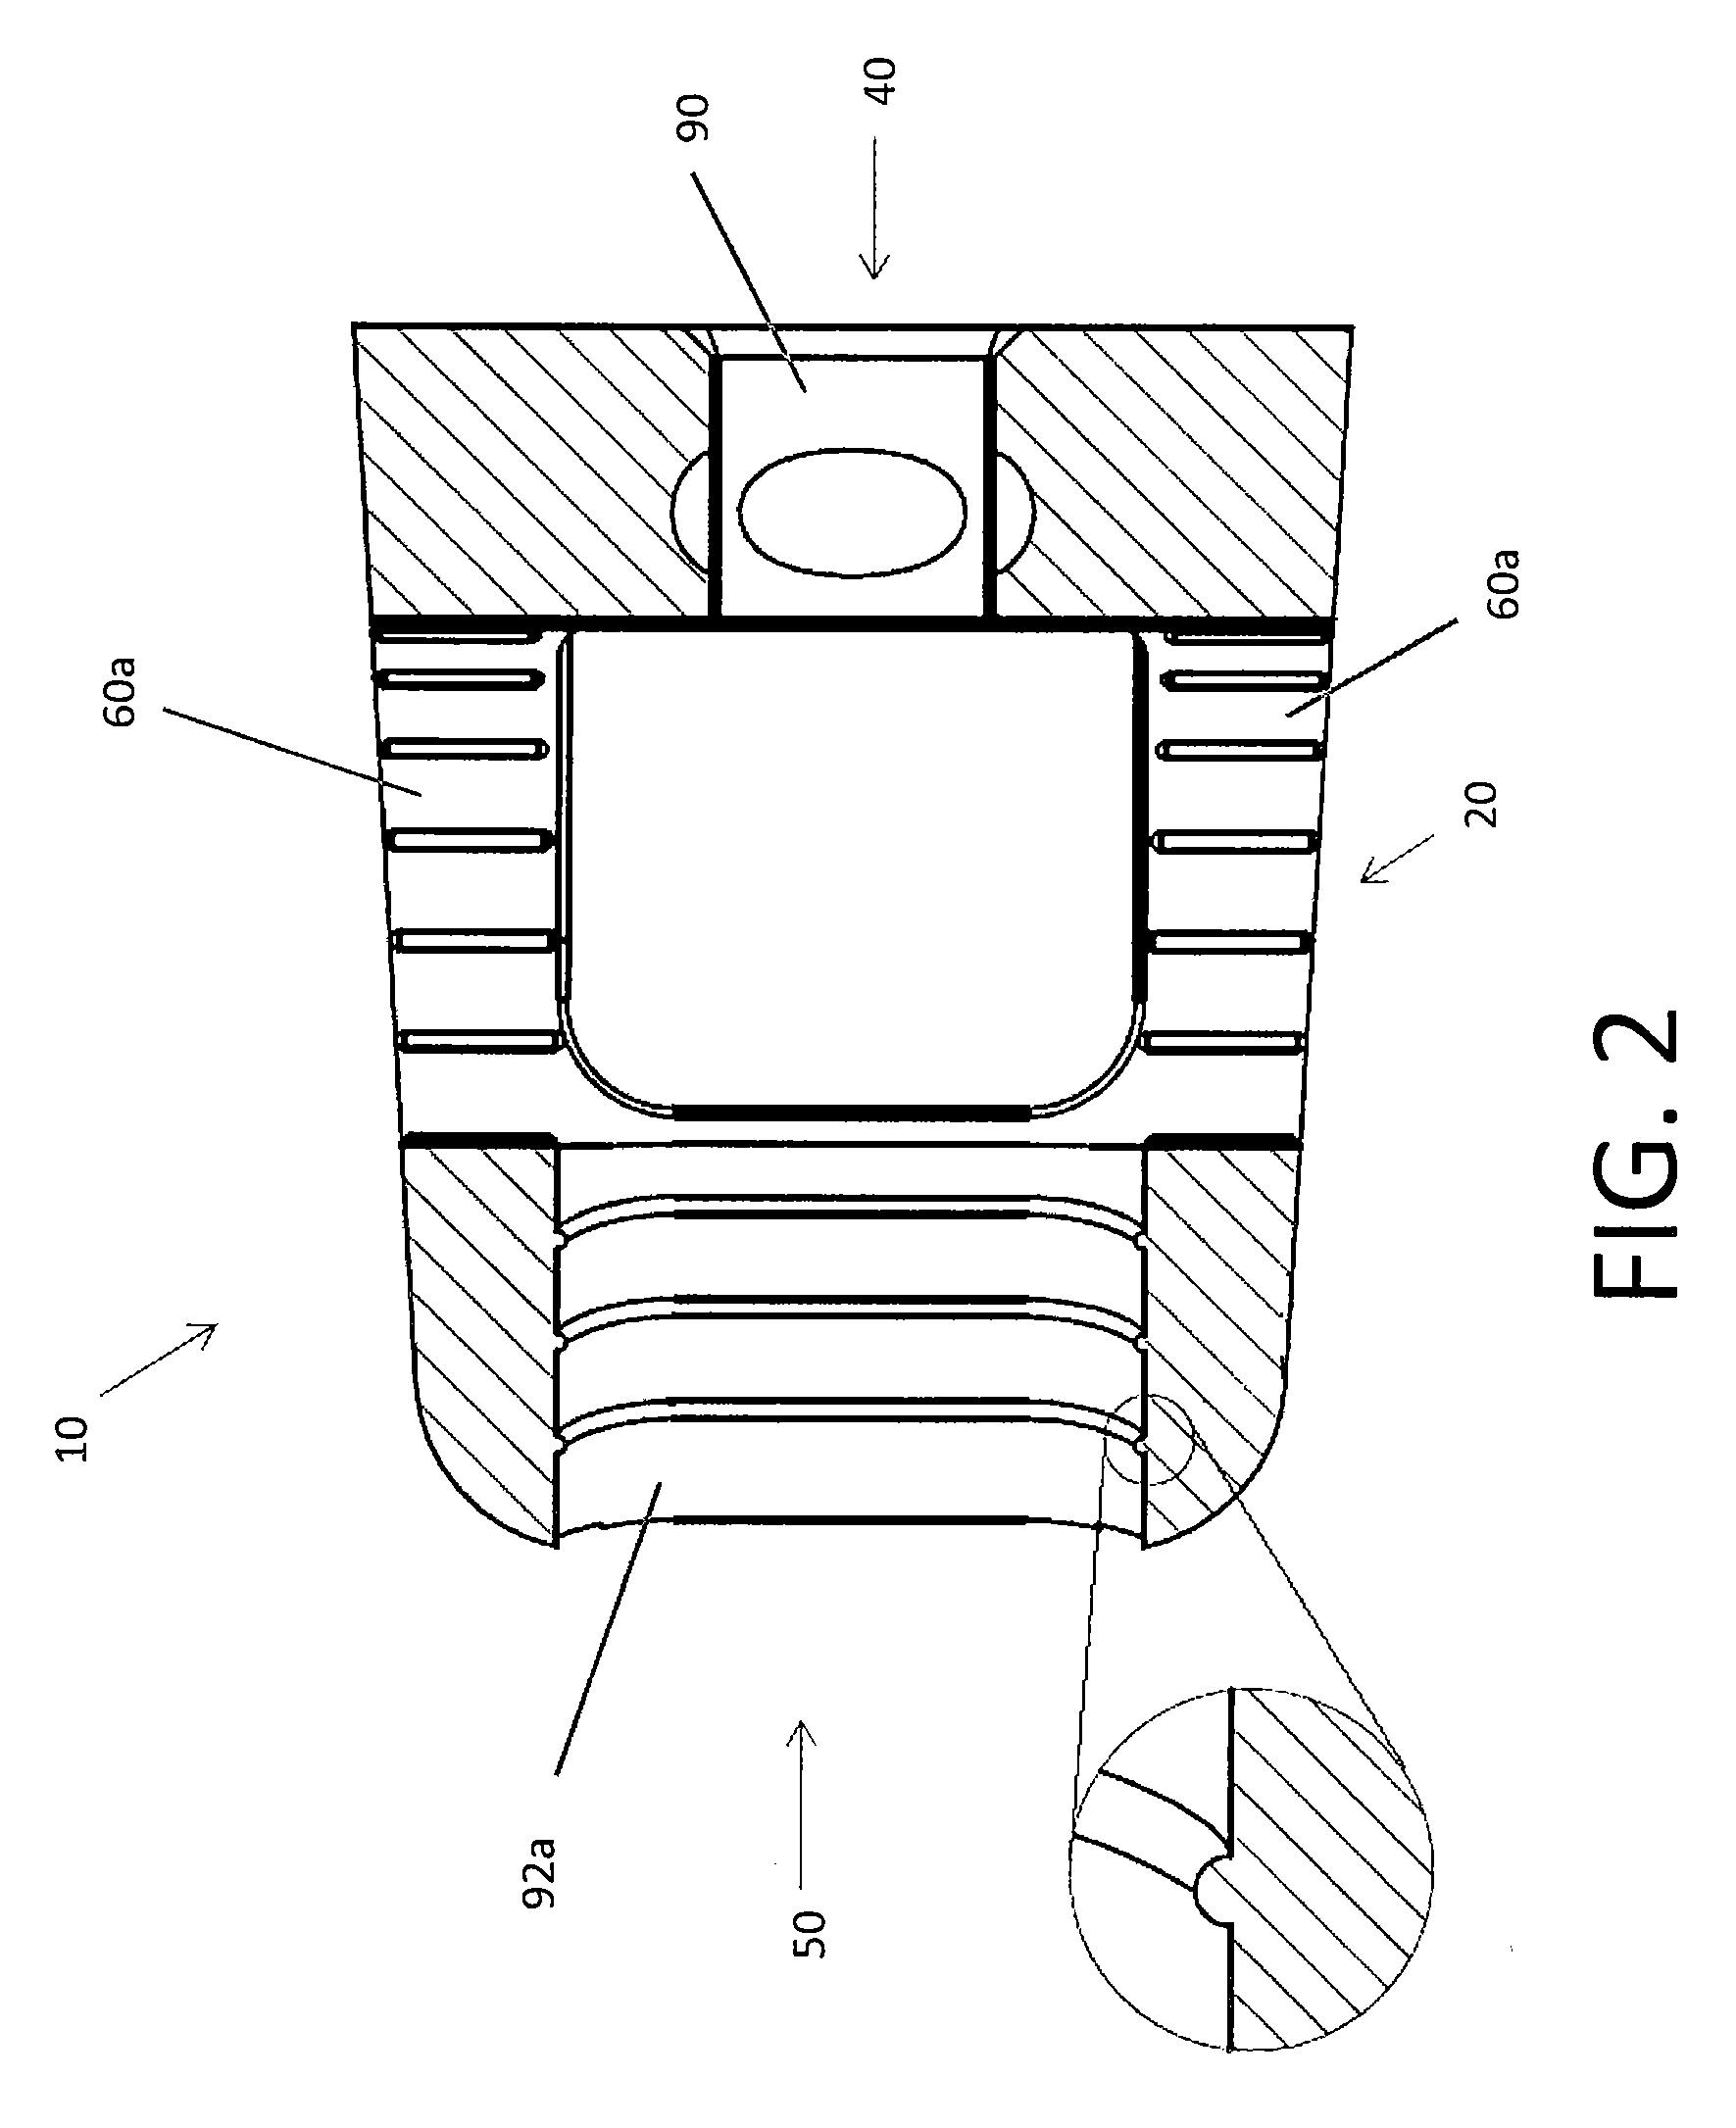 Implants having internal features for graft retention and load transfer between implant and vertebrae